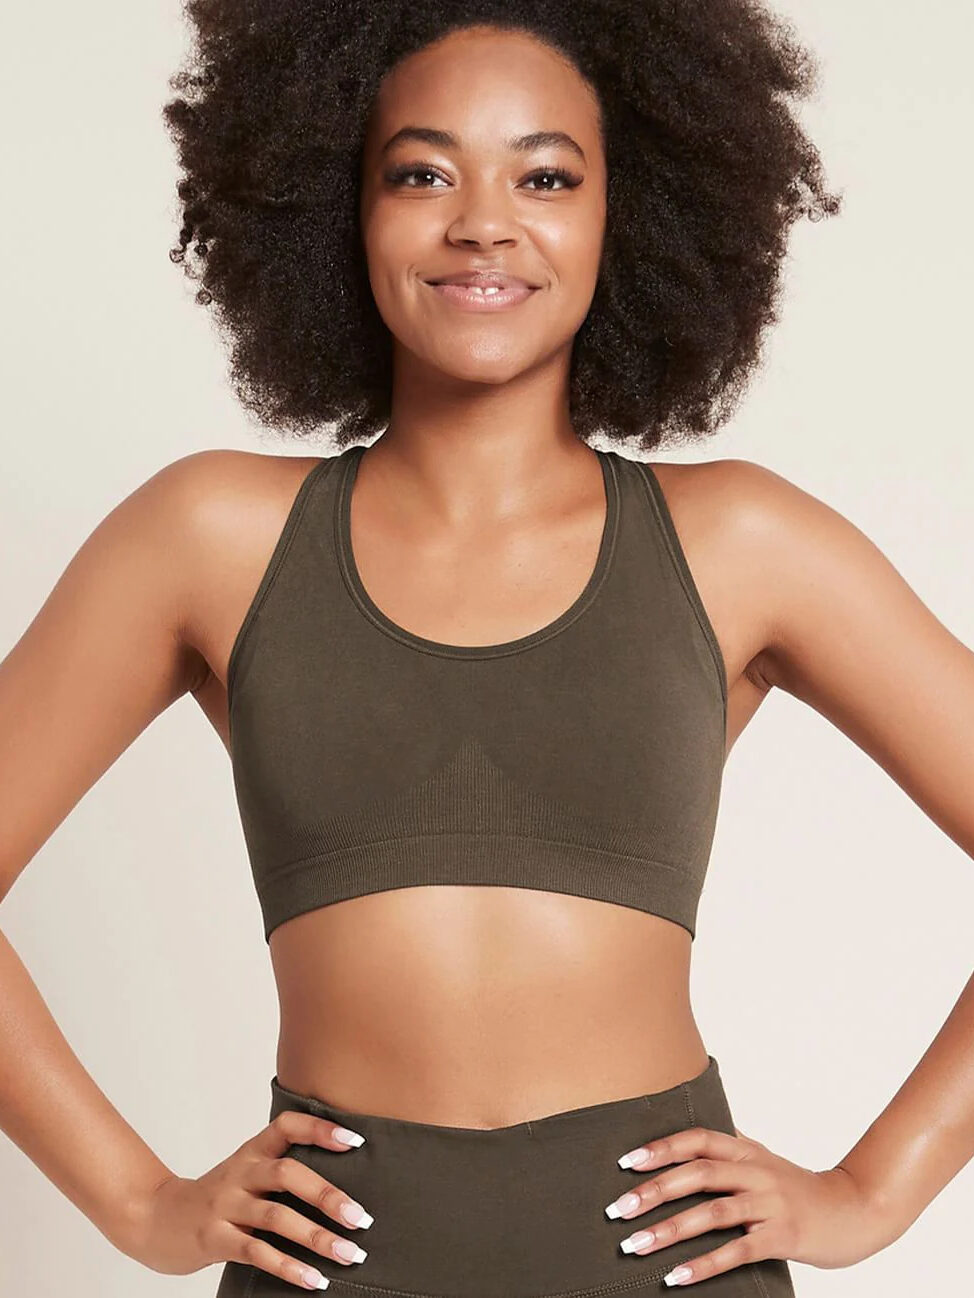 Studio shot of a model wearing a Boody racerback sports bra and matching bottoms in a dark-green-grey shade.